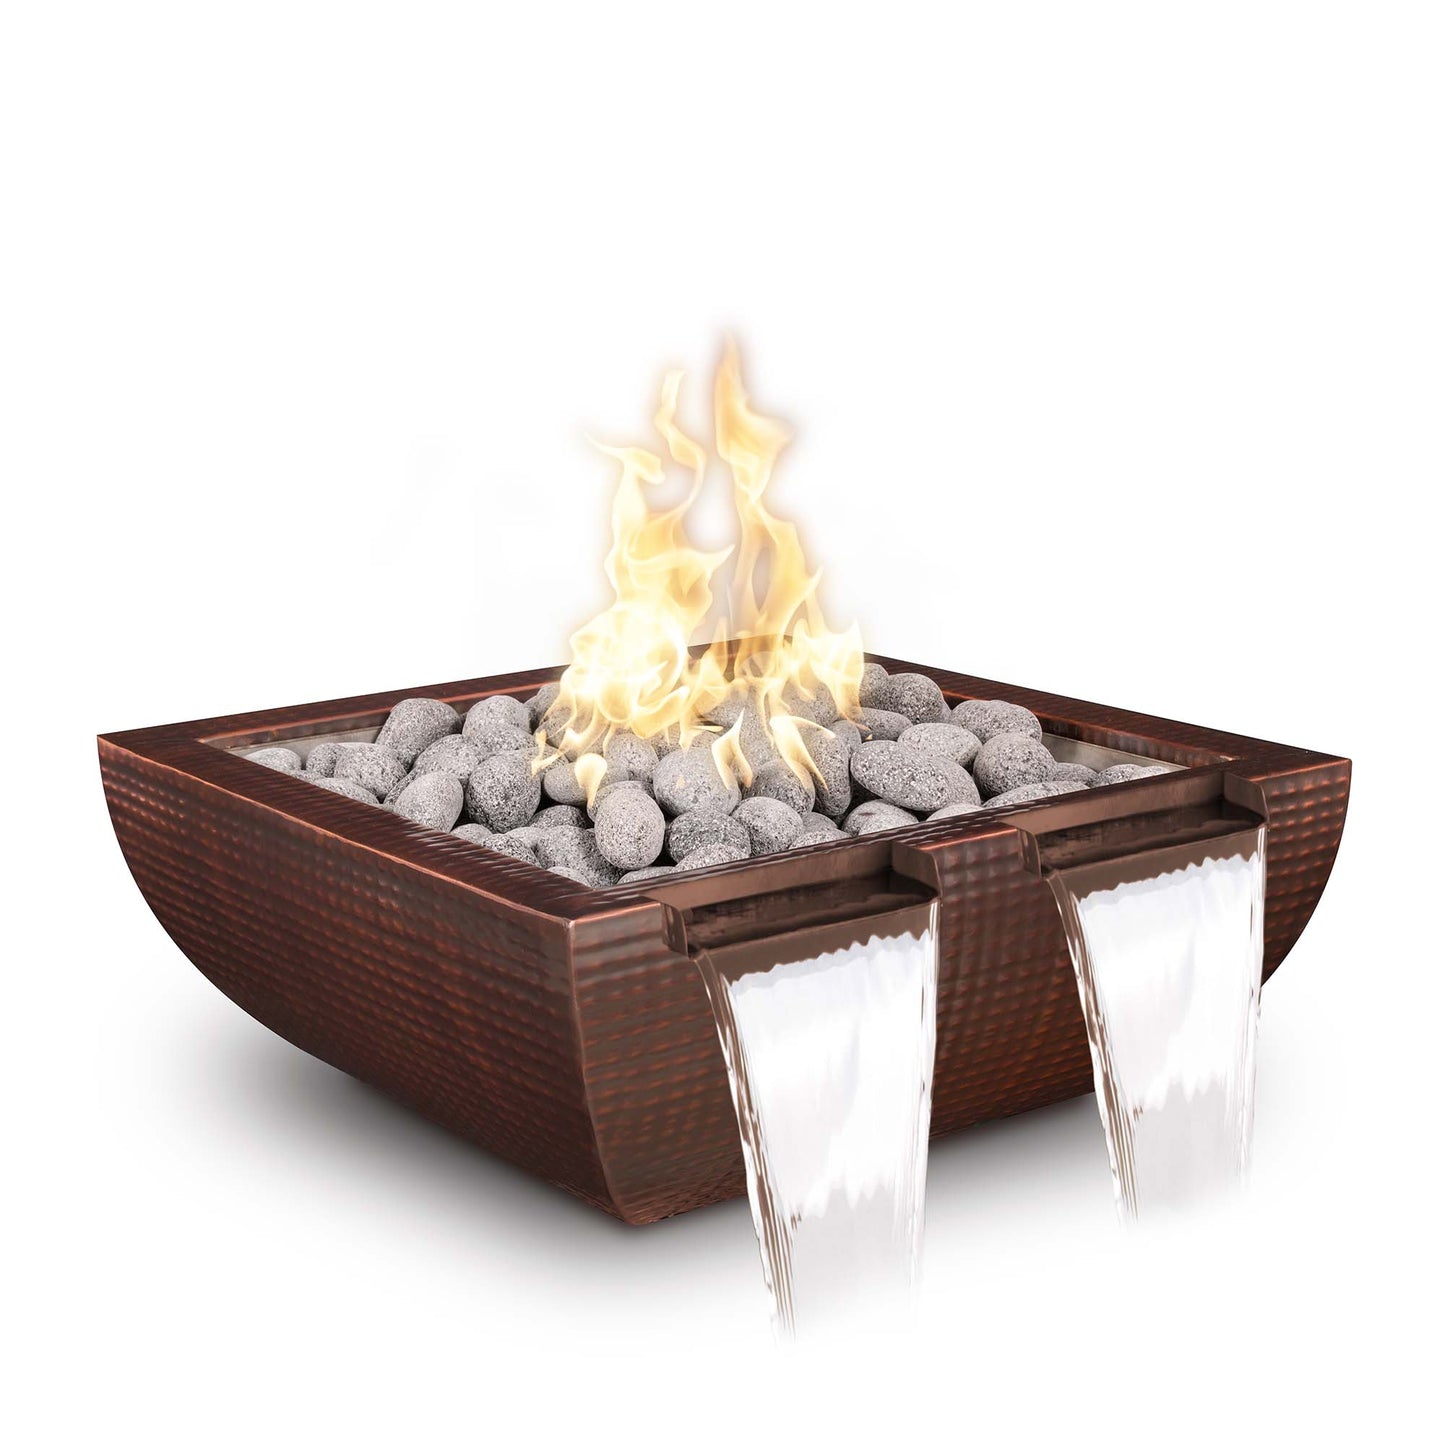 The Outdoor Plus Avalon Twin Spill 24" Copper Vein Powder Coated Metal Liquid Propane Fire & Water Bowl with 12V Electronic Ignition